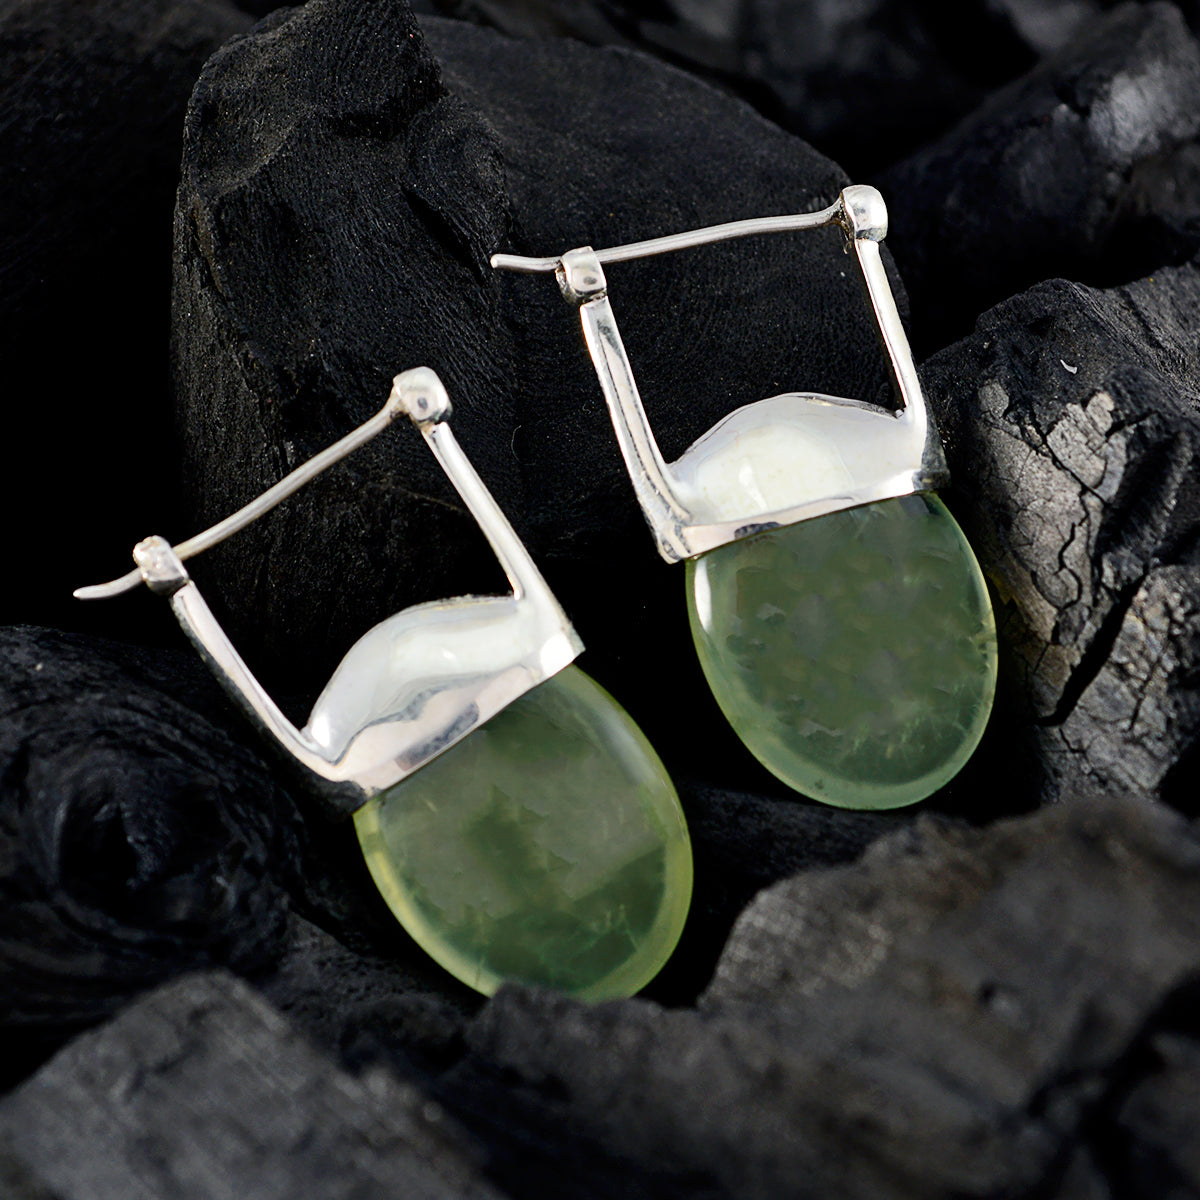 Riyo Real Gemstones oval Cabochon Light Green Prehnite Silver Earring gift for labour day